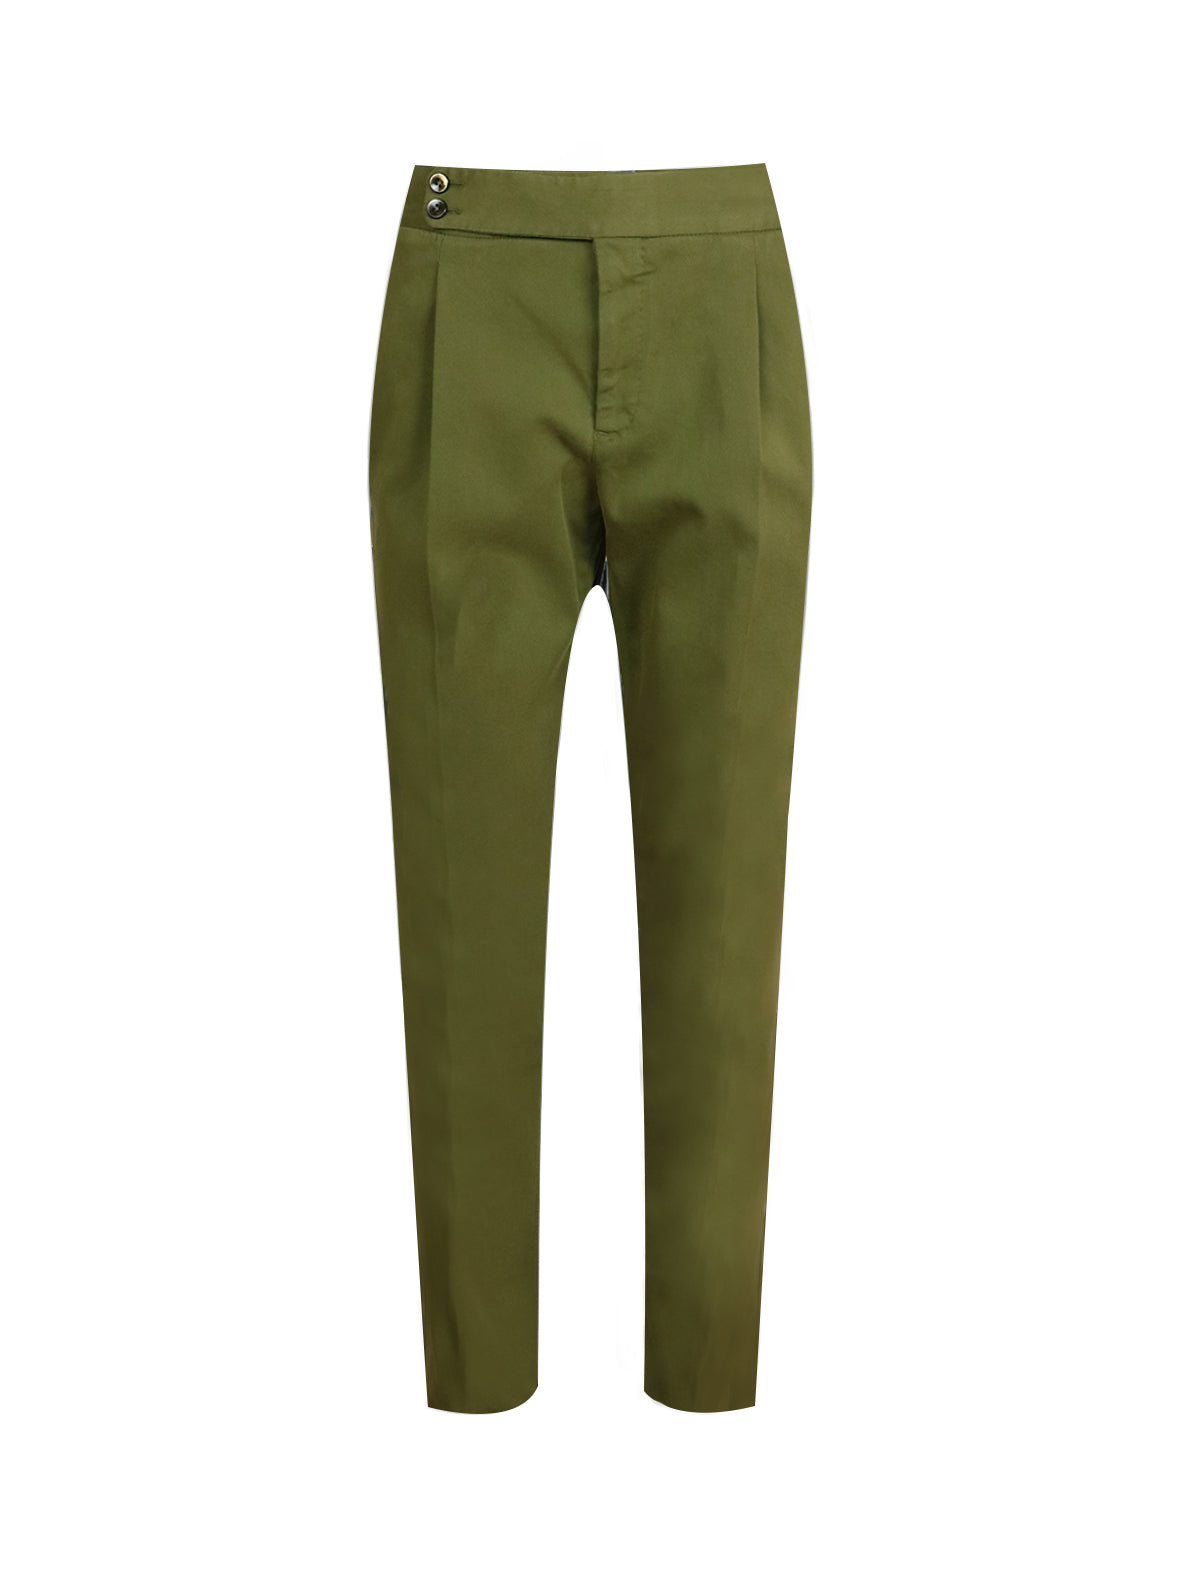 PT Torino Cotton Tapered Trouser in Green